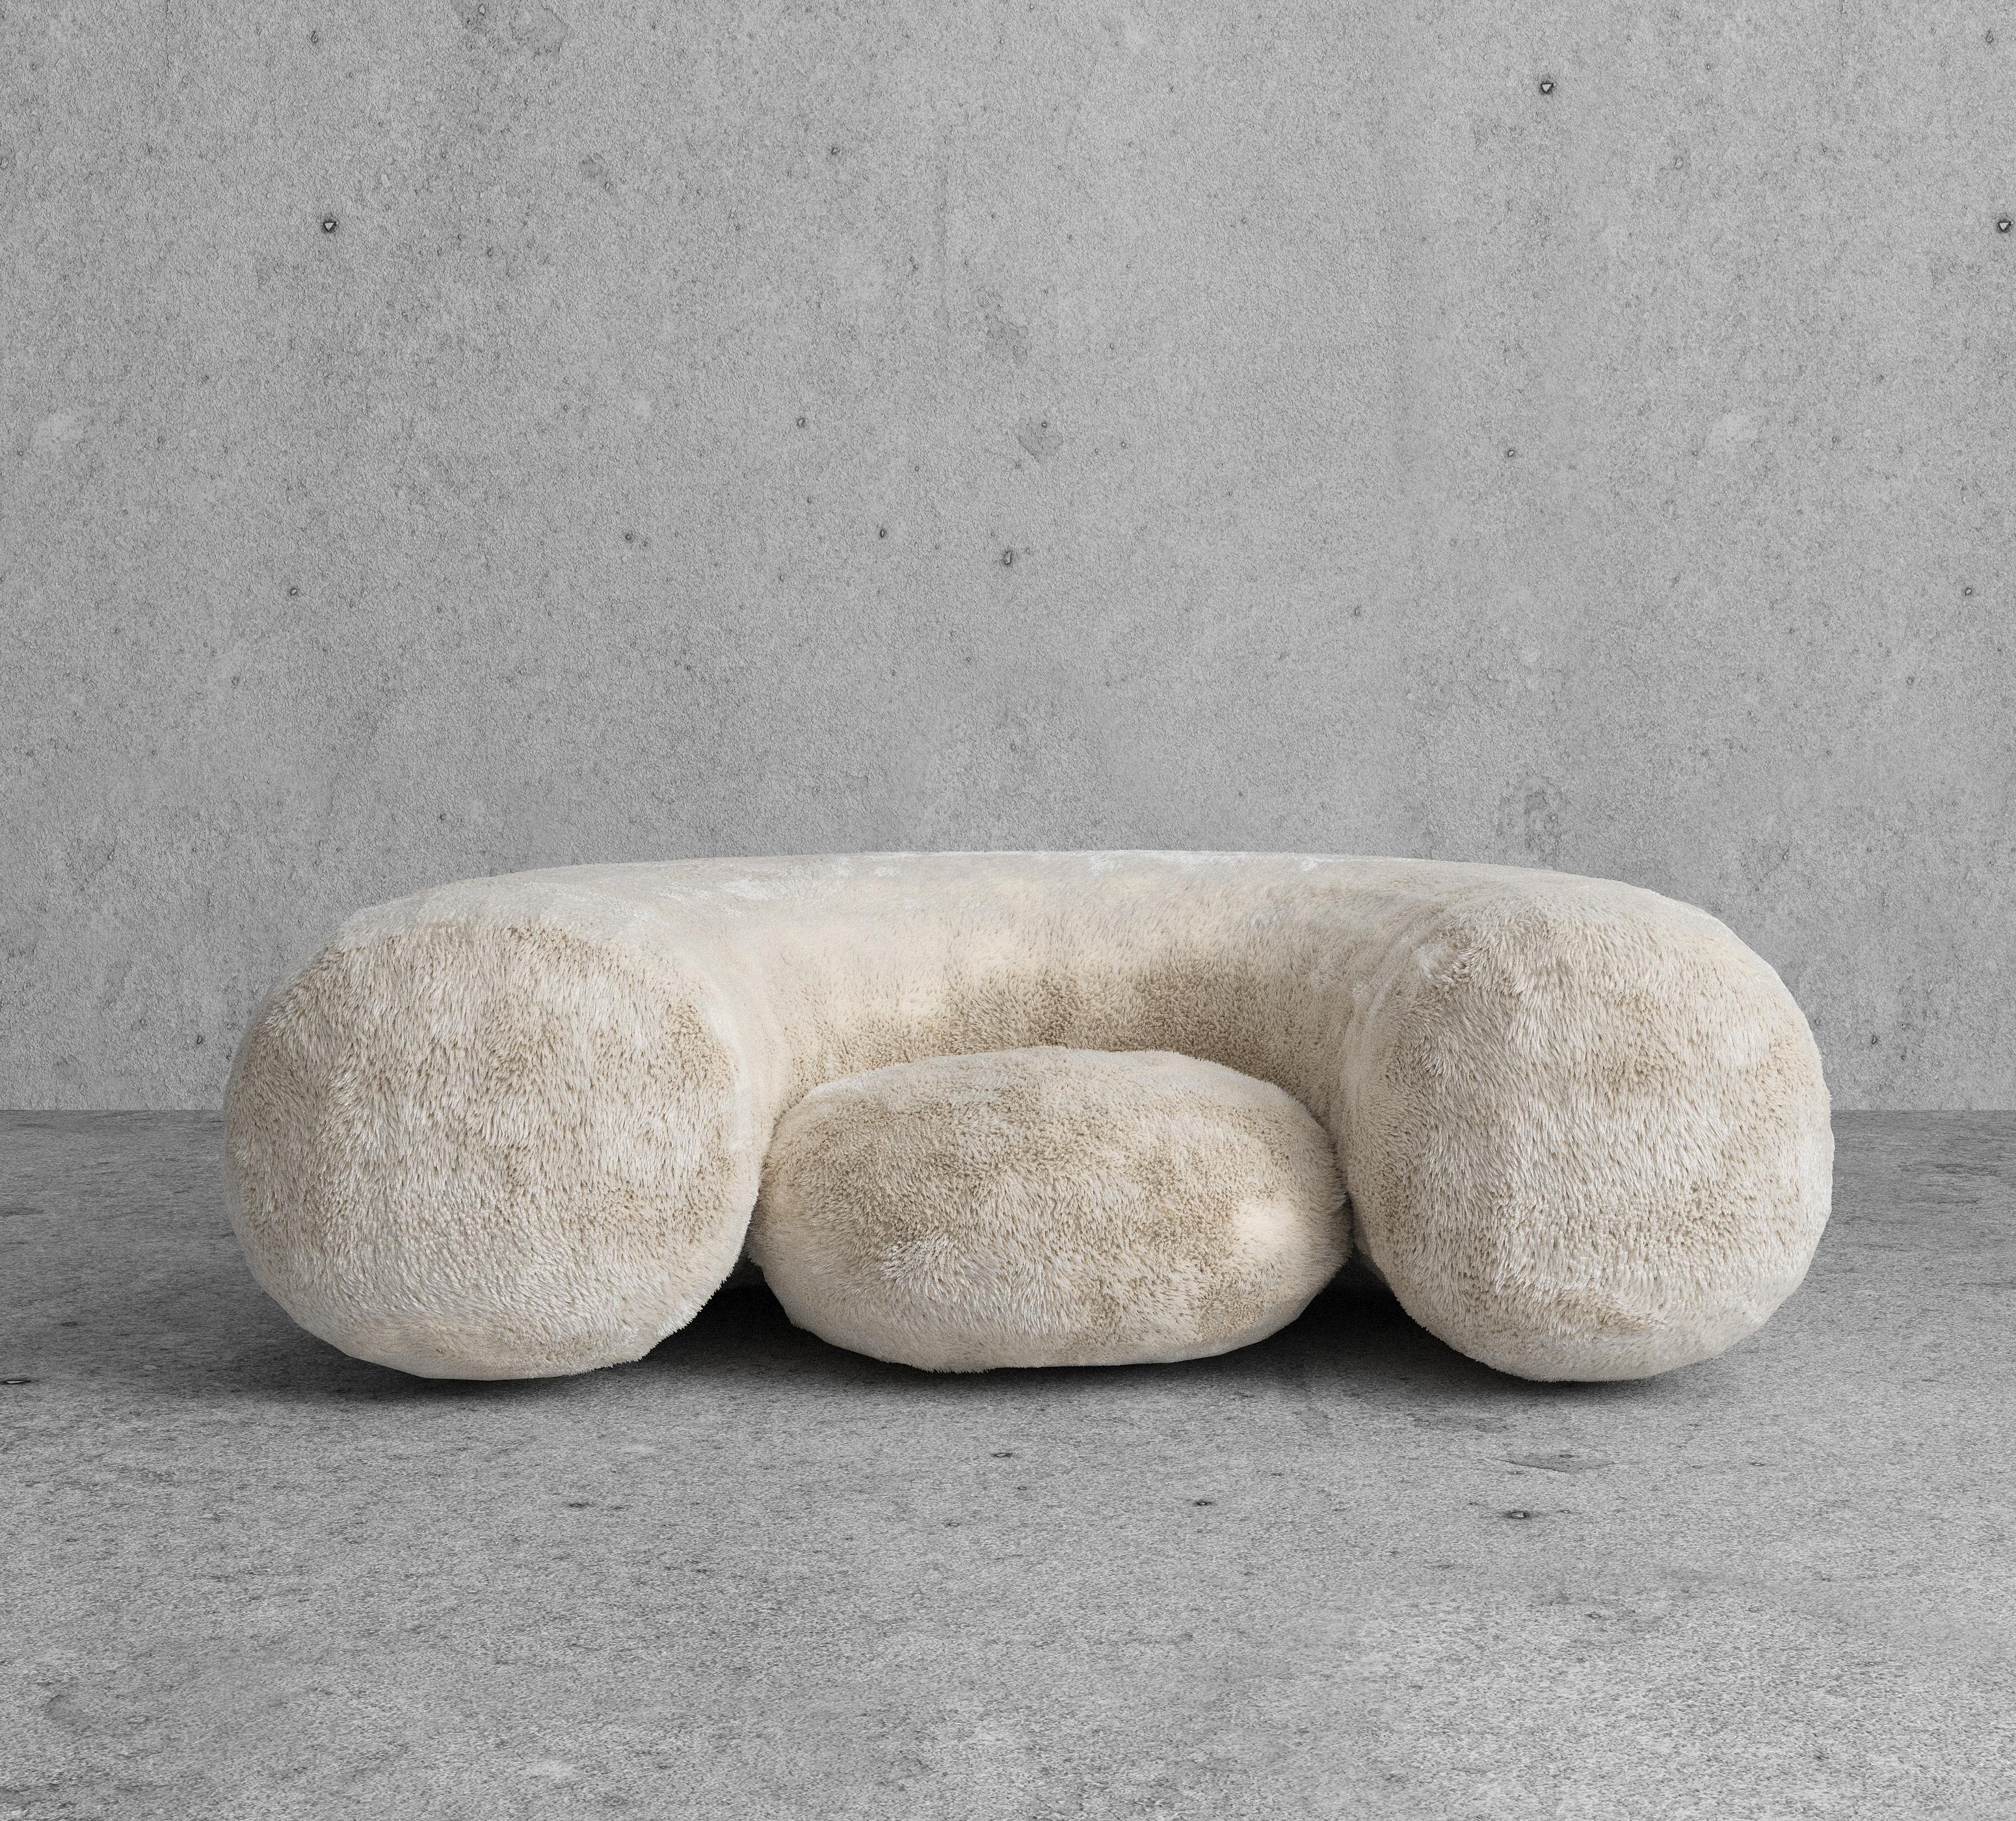 The Billy Teddy lounge chair from the Bubbly collection by Koki Design House is like sitting on a cloud or cuddling a teddy bear. Not a simple lounge chair, but a new take on a relaxing experience in style. In Teddy fabric.

The internal structure